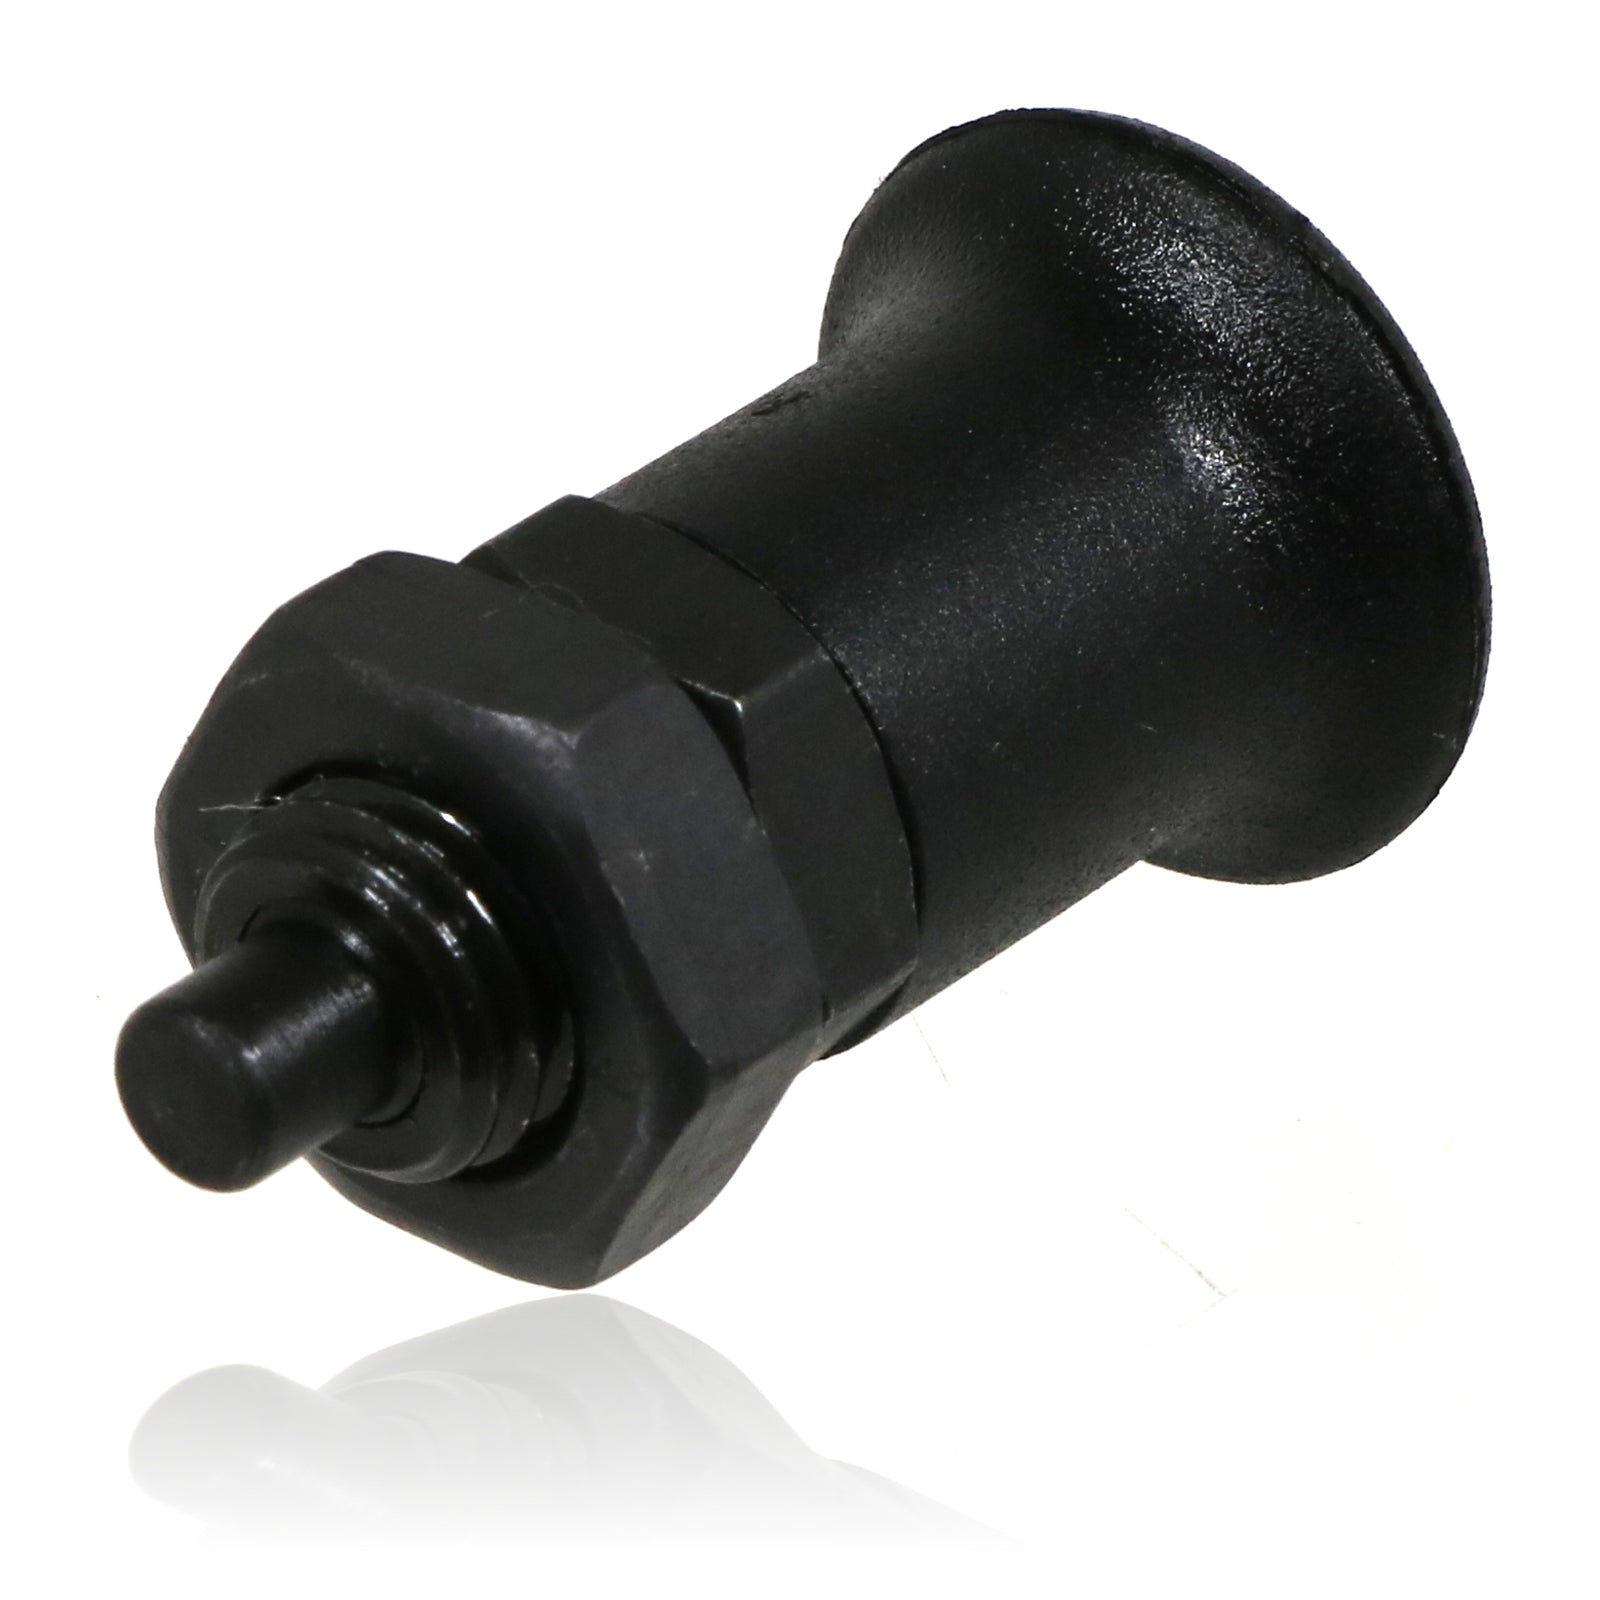 M12 Index Plunger Spring Loaded Retractable Locking Pin Blackened Steel